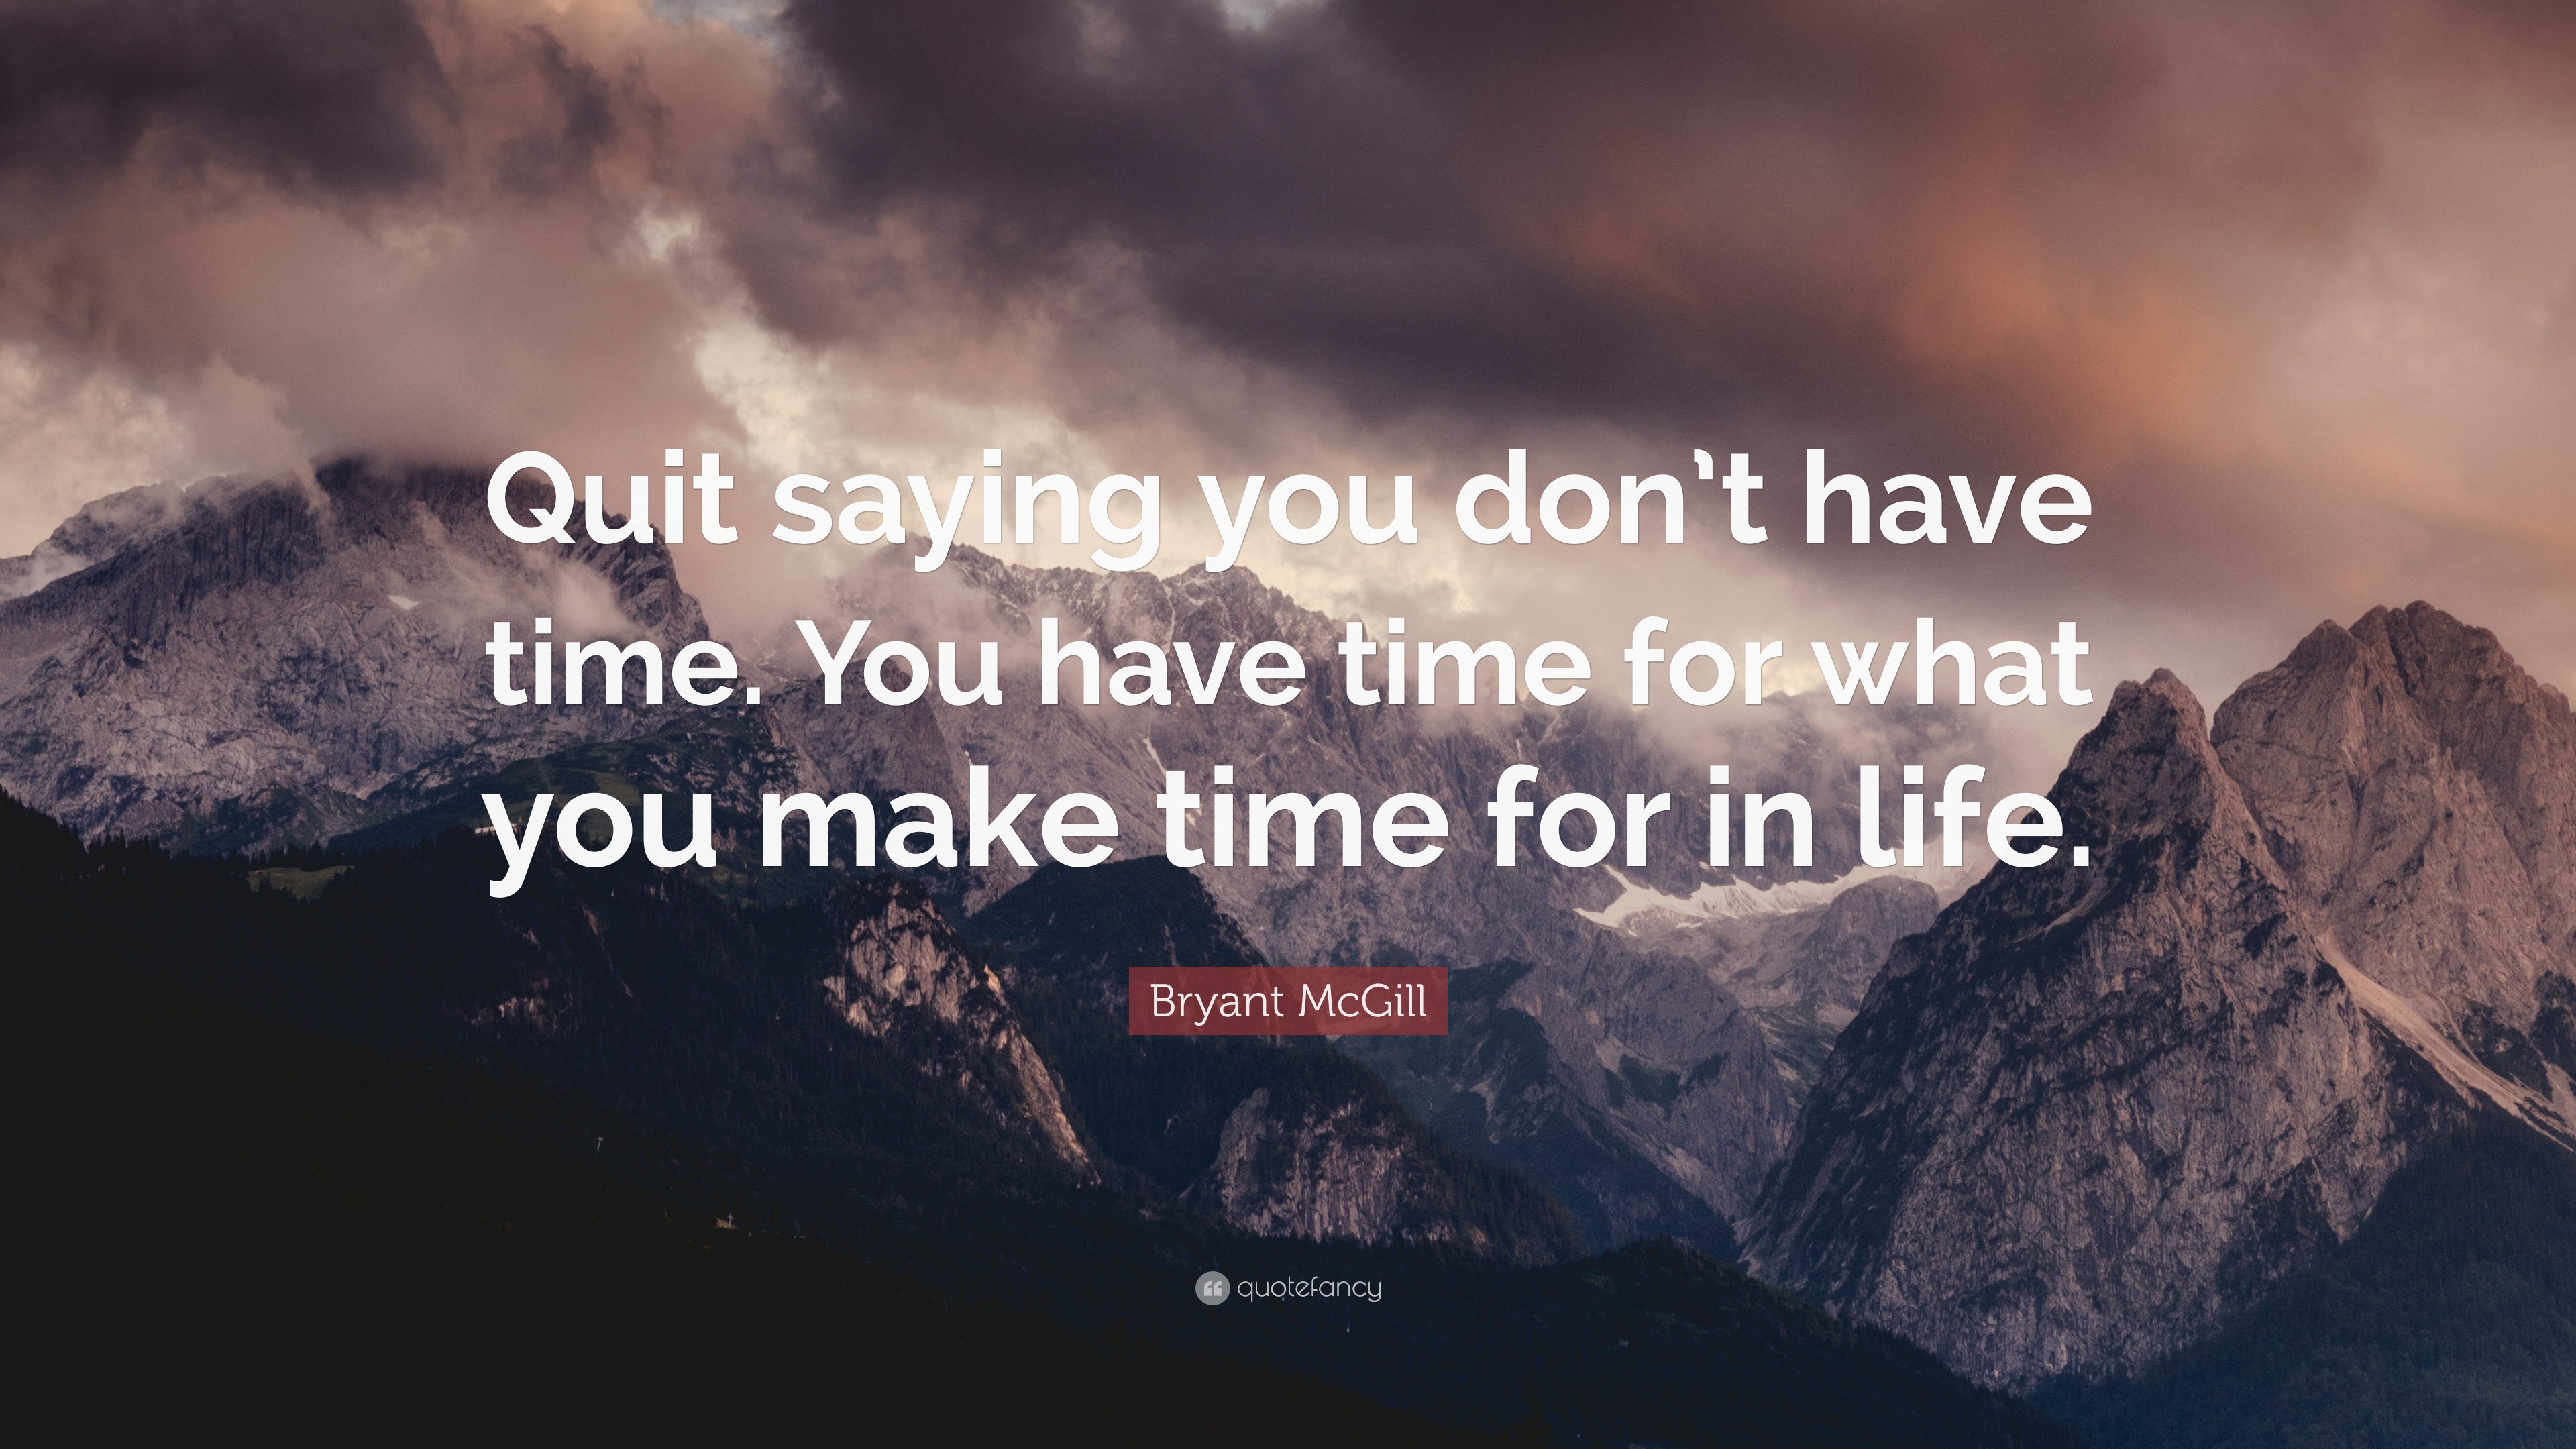 Bryant McGill Quote: “Quit saying you don’t have time. You have time ...